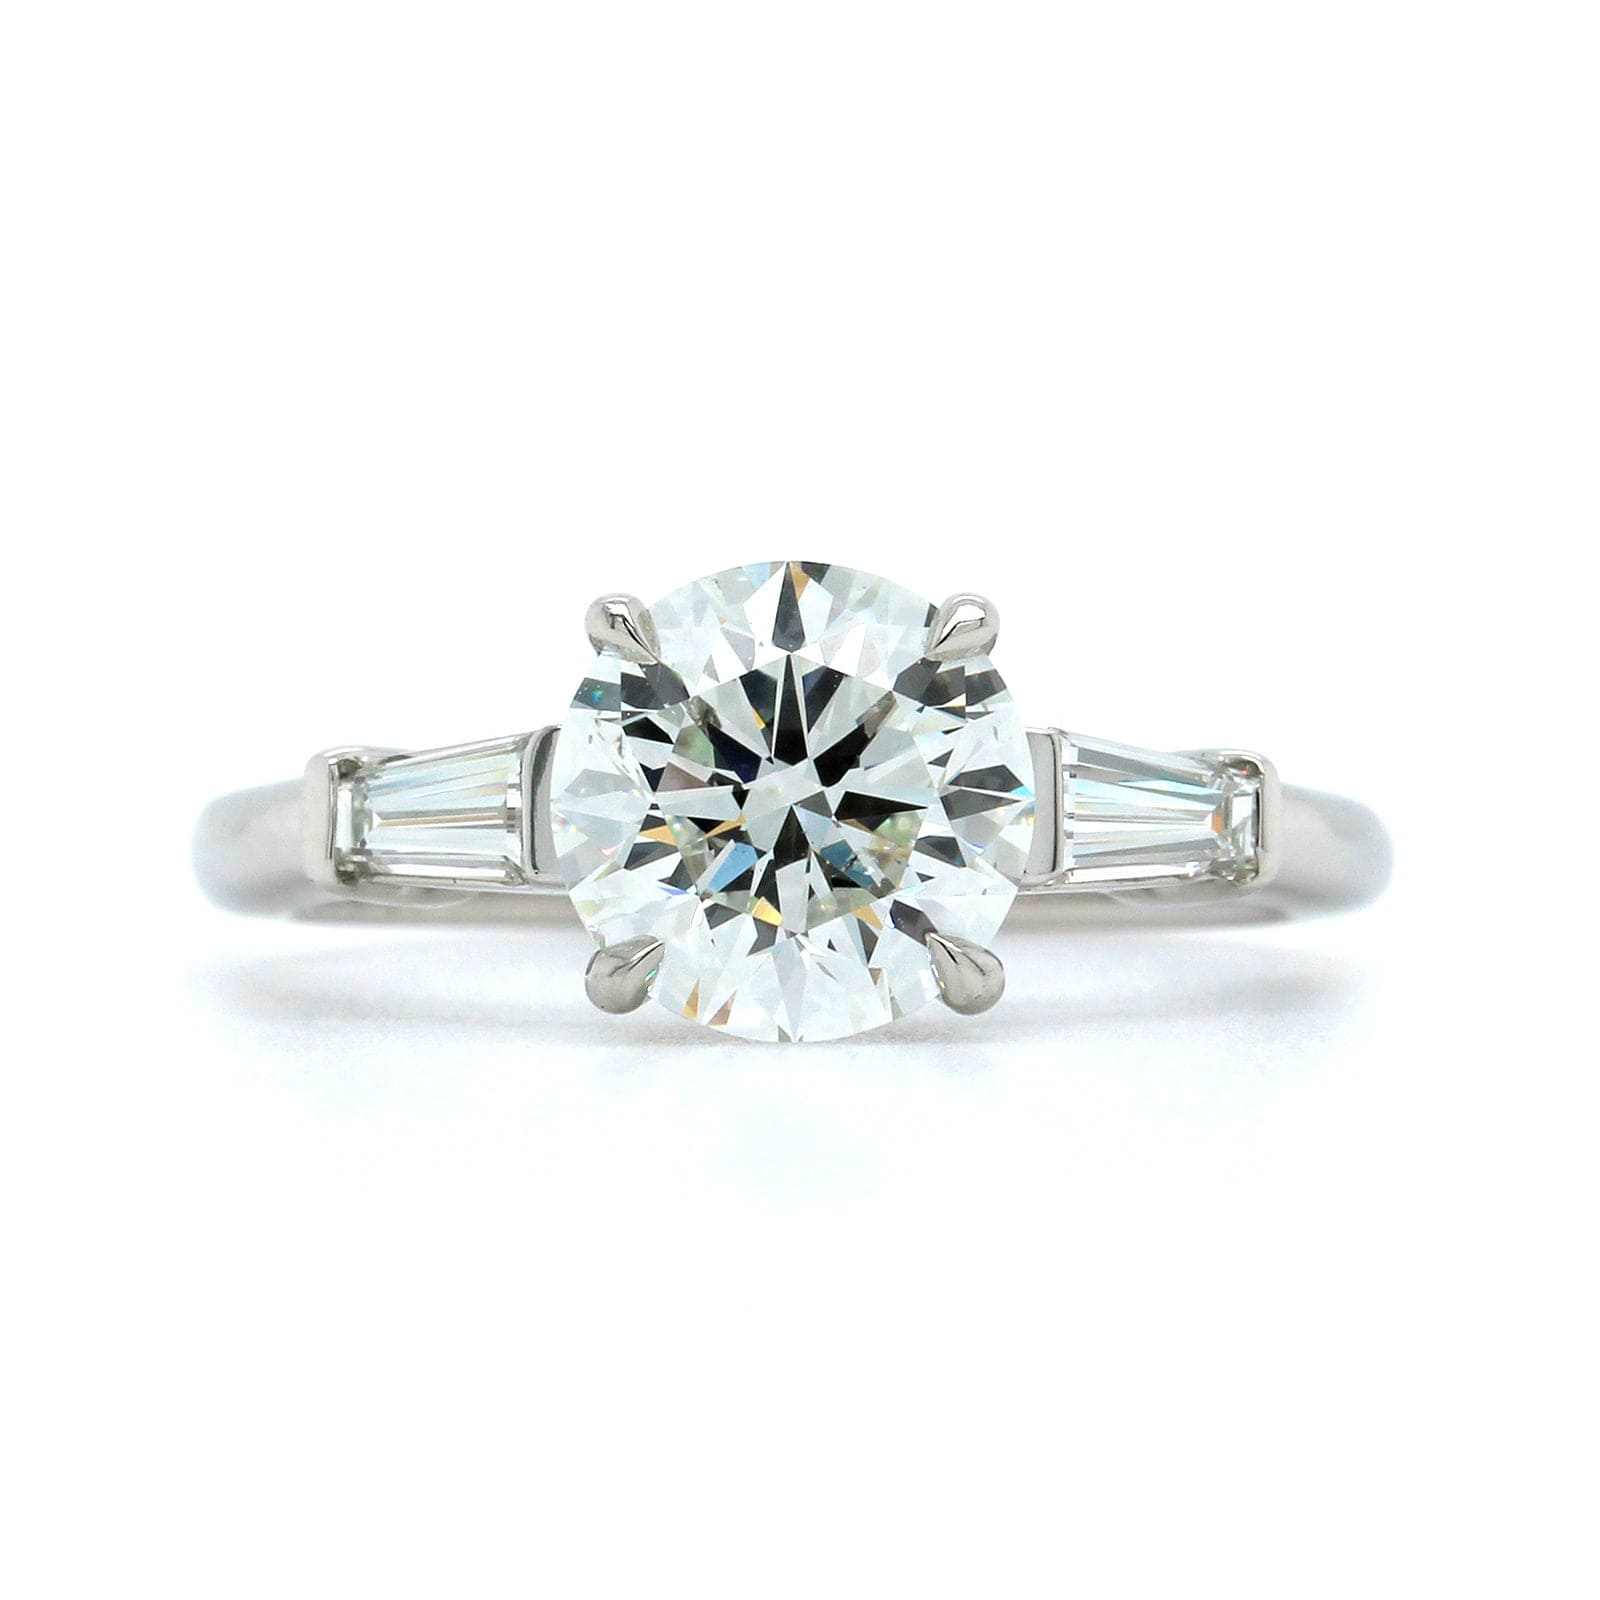 Platinum Round Diamond with Baguette Sides Engagement Ring